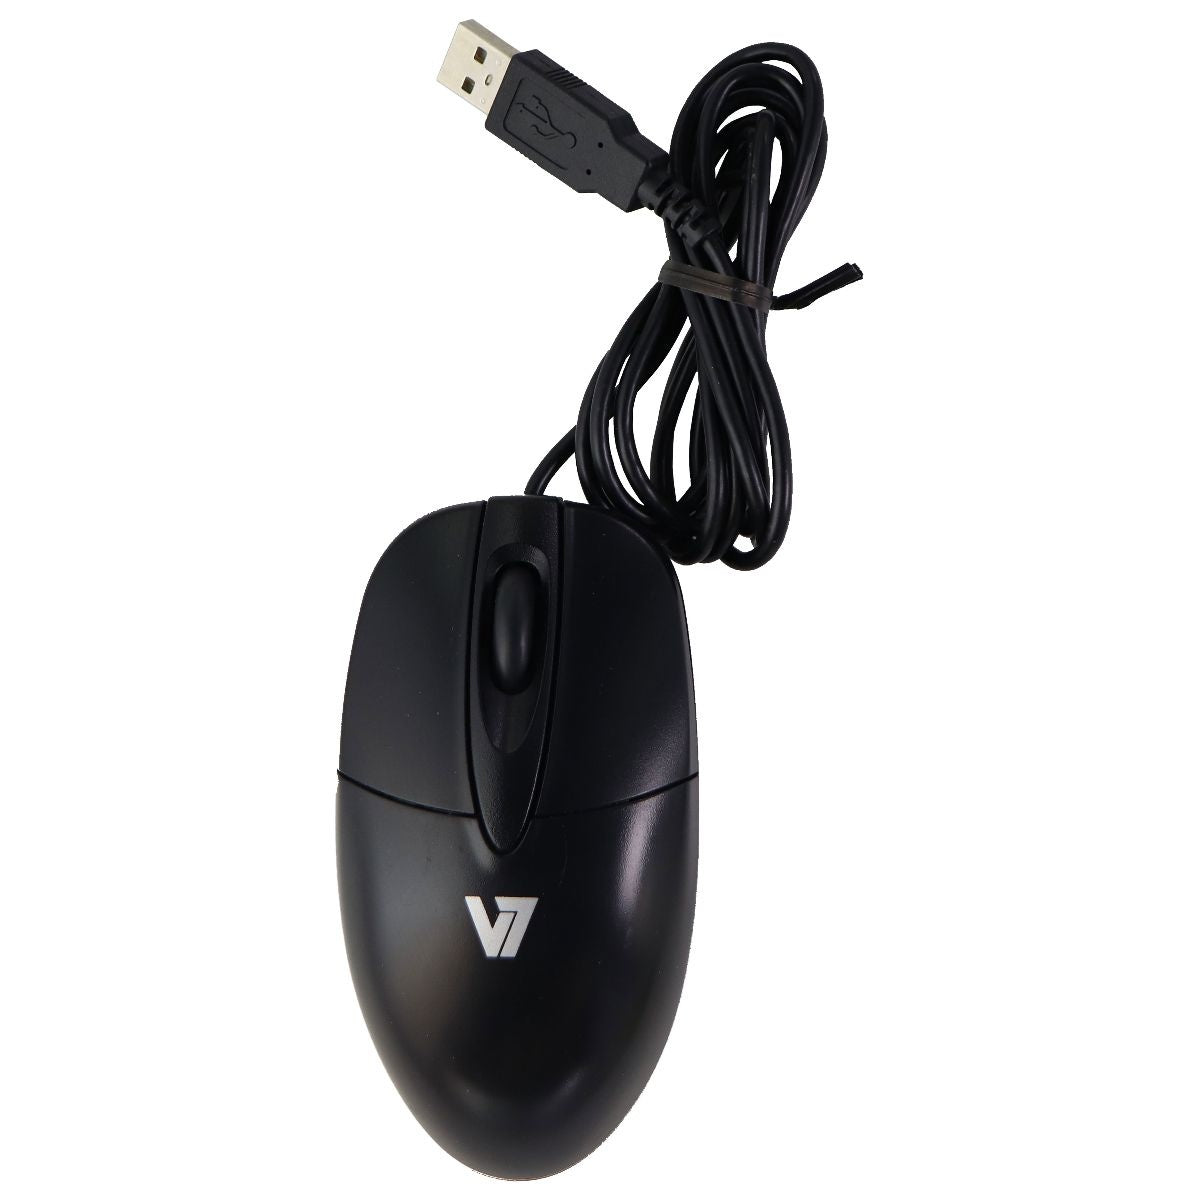 V7 Wired USB Optical Mouse for Windows PC & More - Black (M30P10) Keyboards/Mice - Mice, Trackballs & Touchpads V7    - Simple Cell Bulk Wholesale Pricing - USA Seller